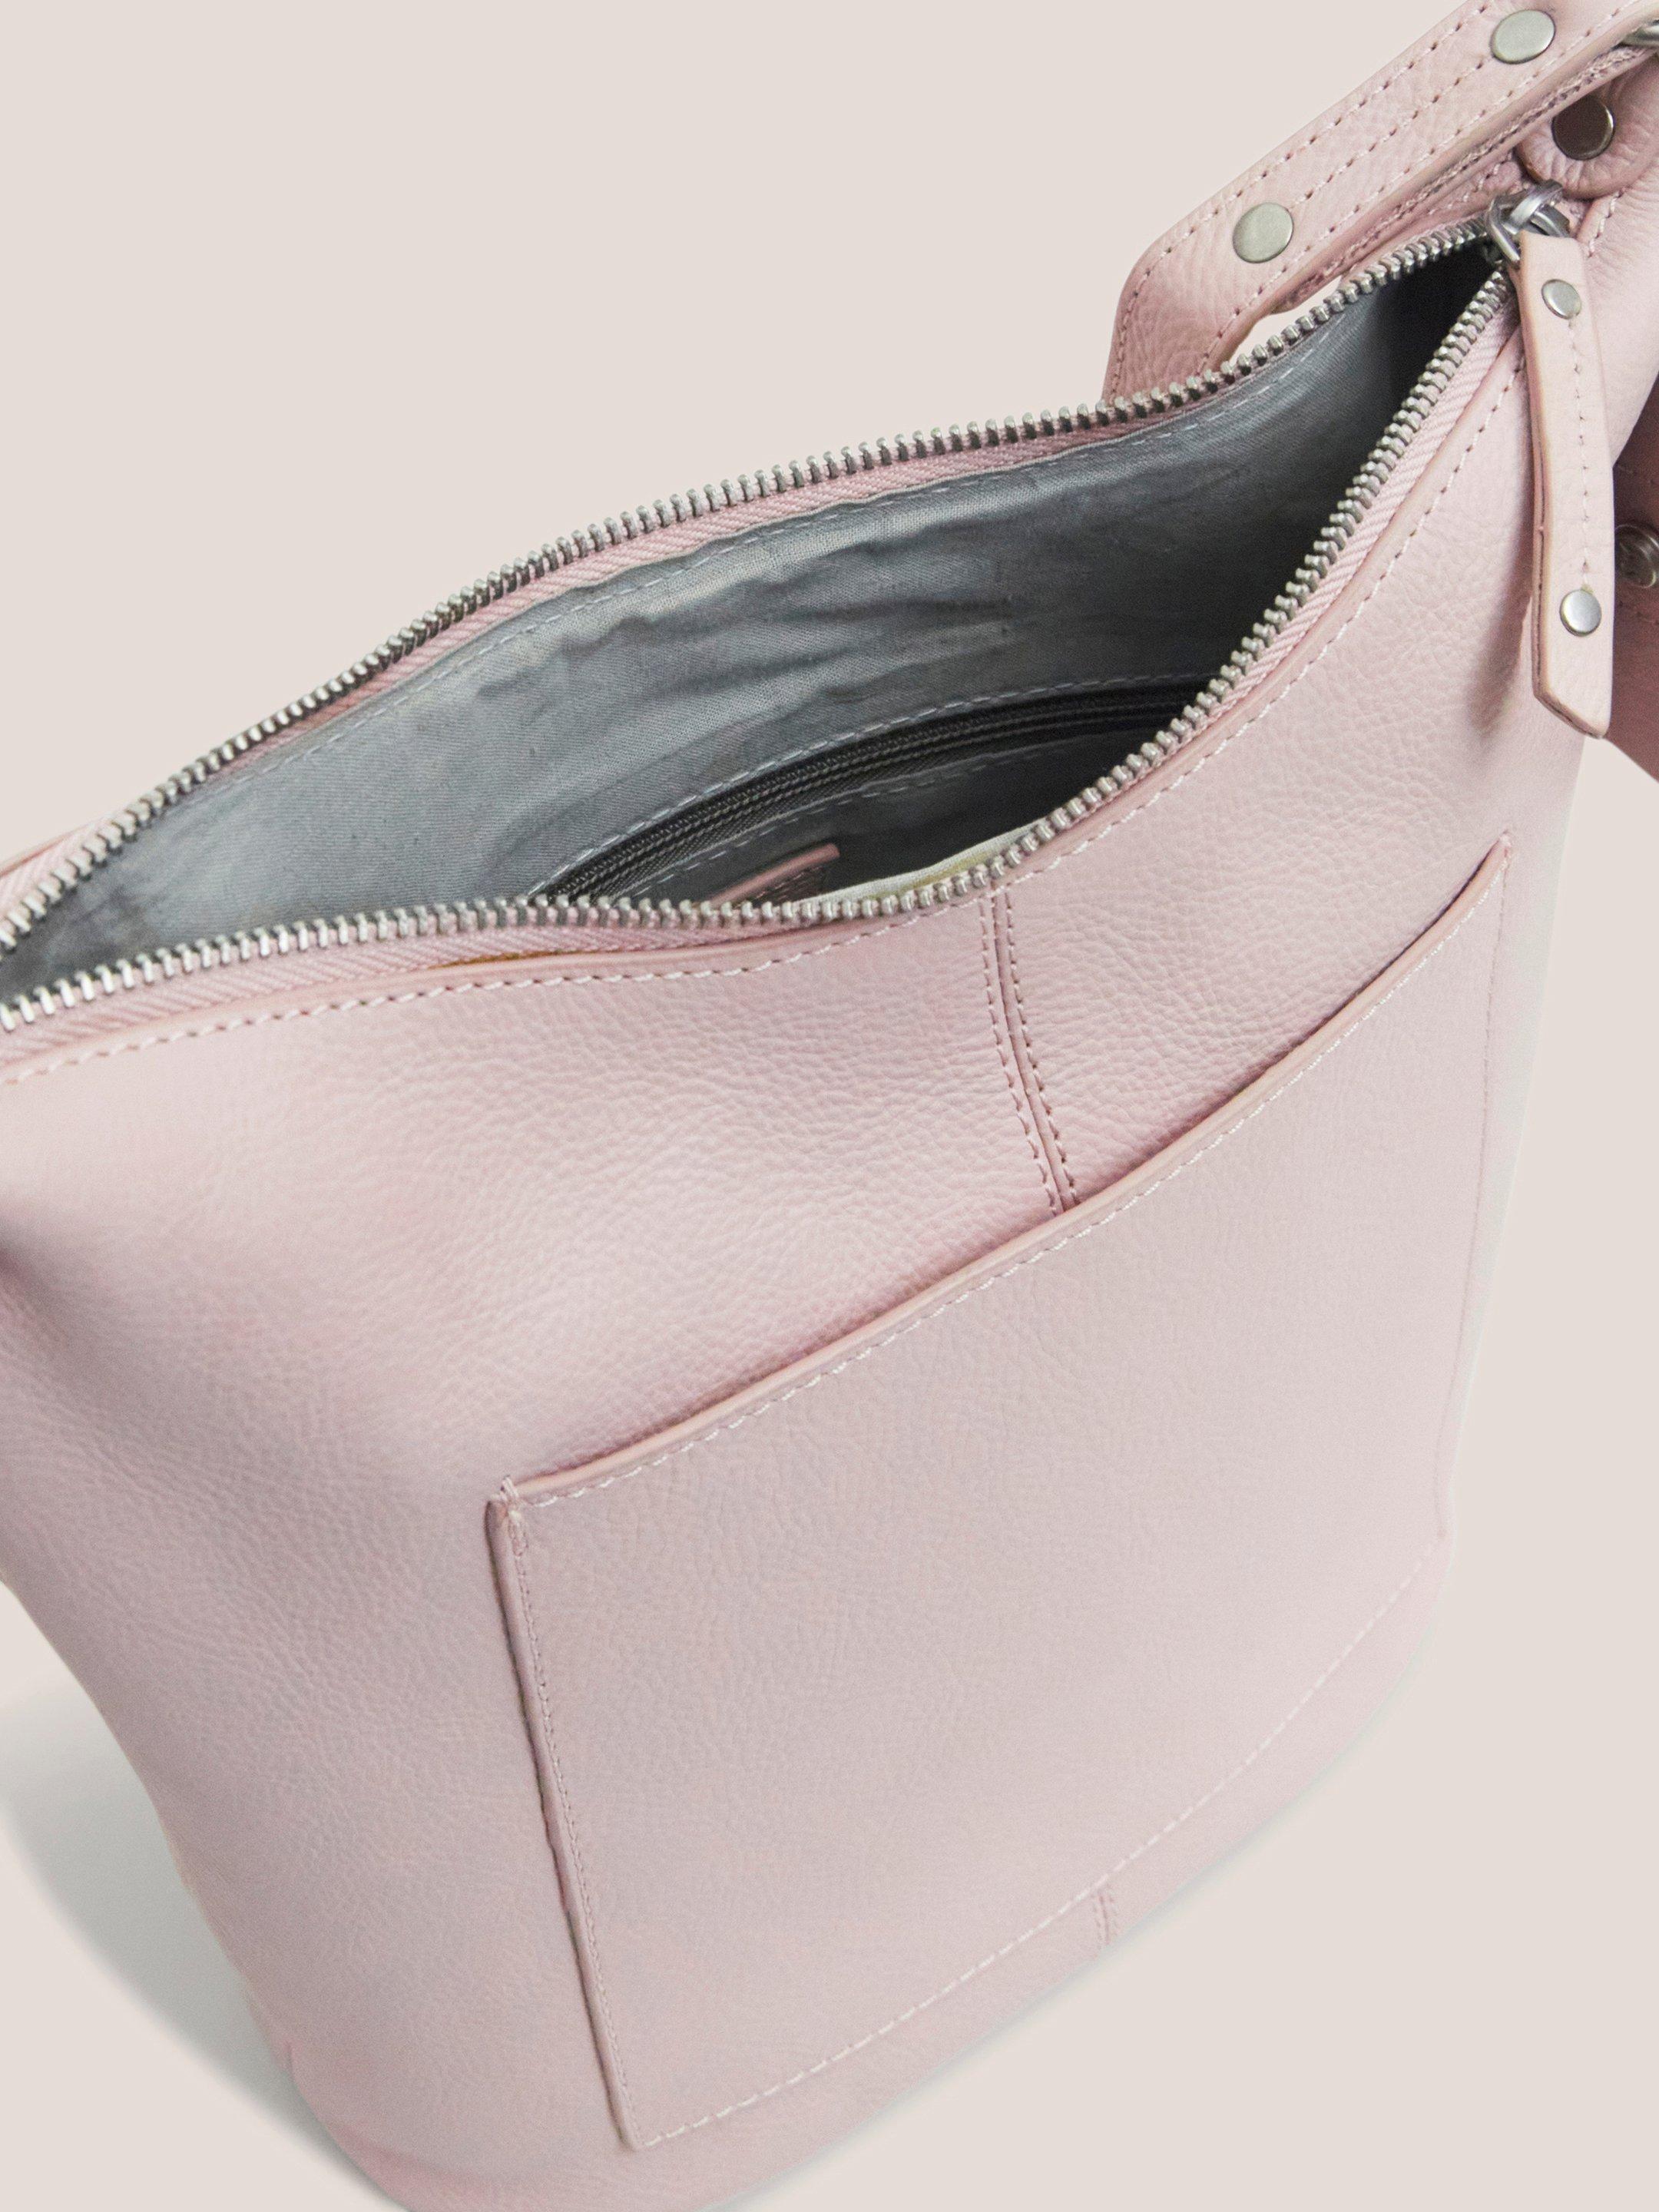 Fern Leather Crossbody in LGT PINK - FLAT FRONT